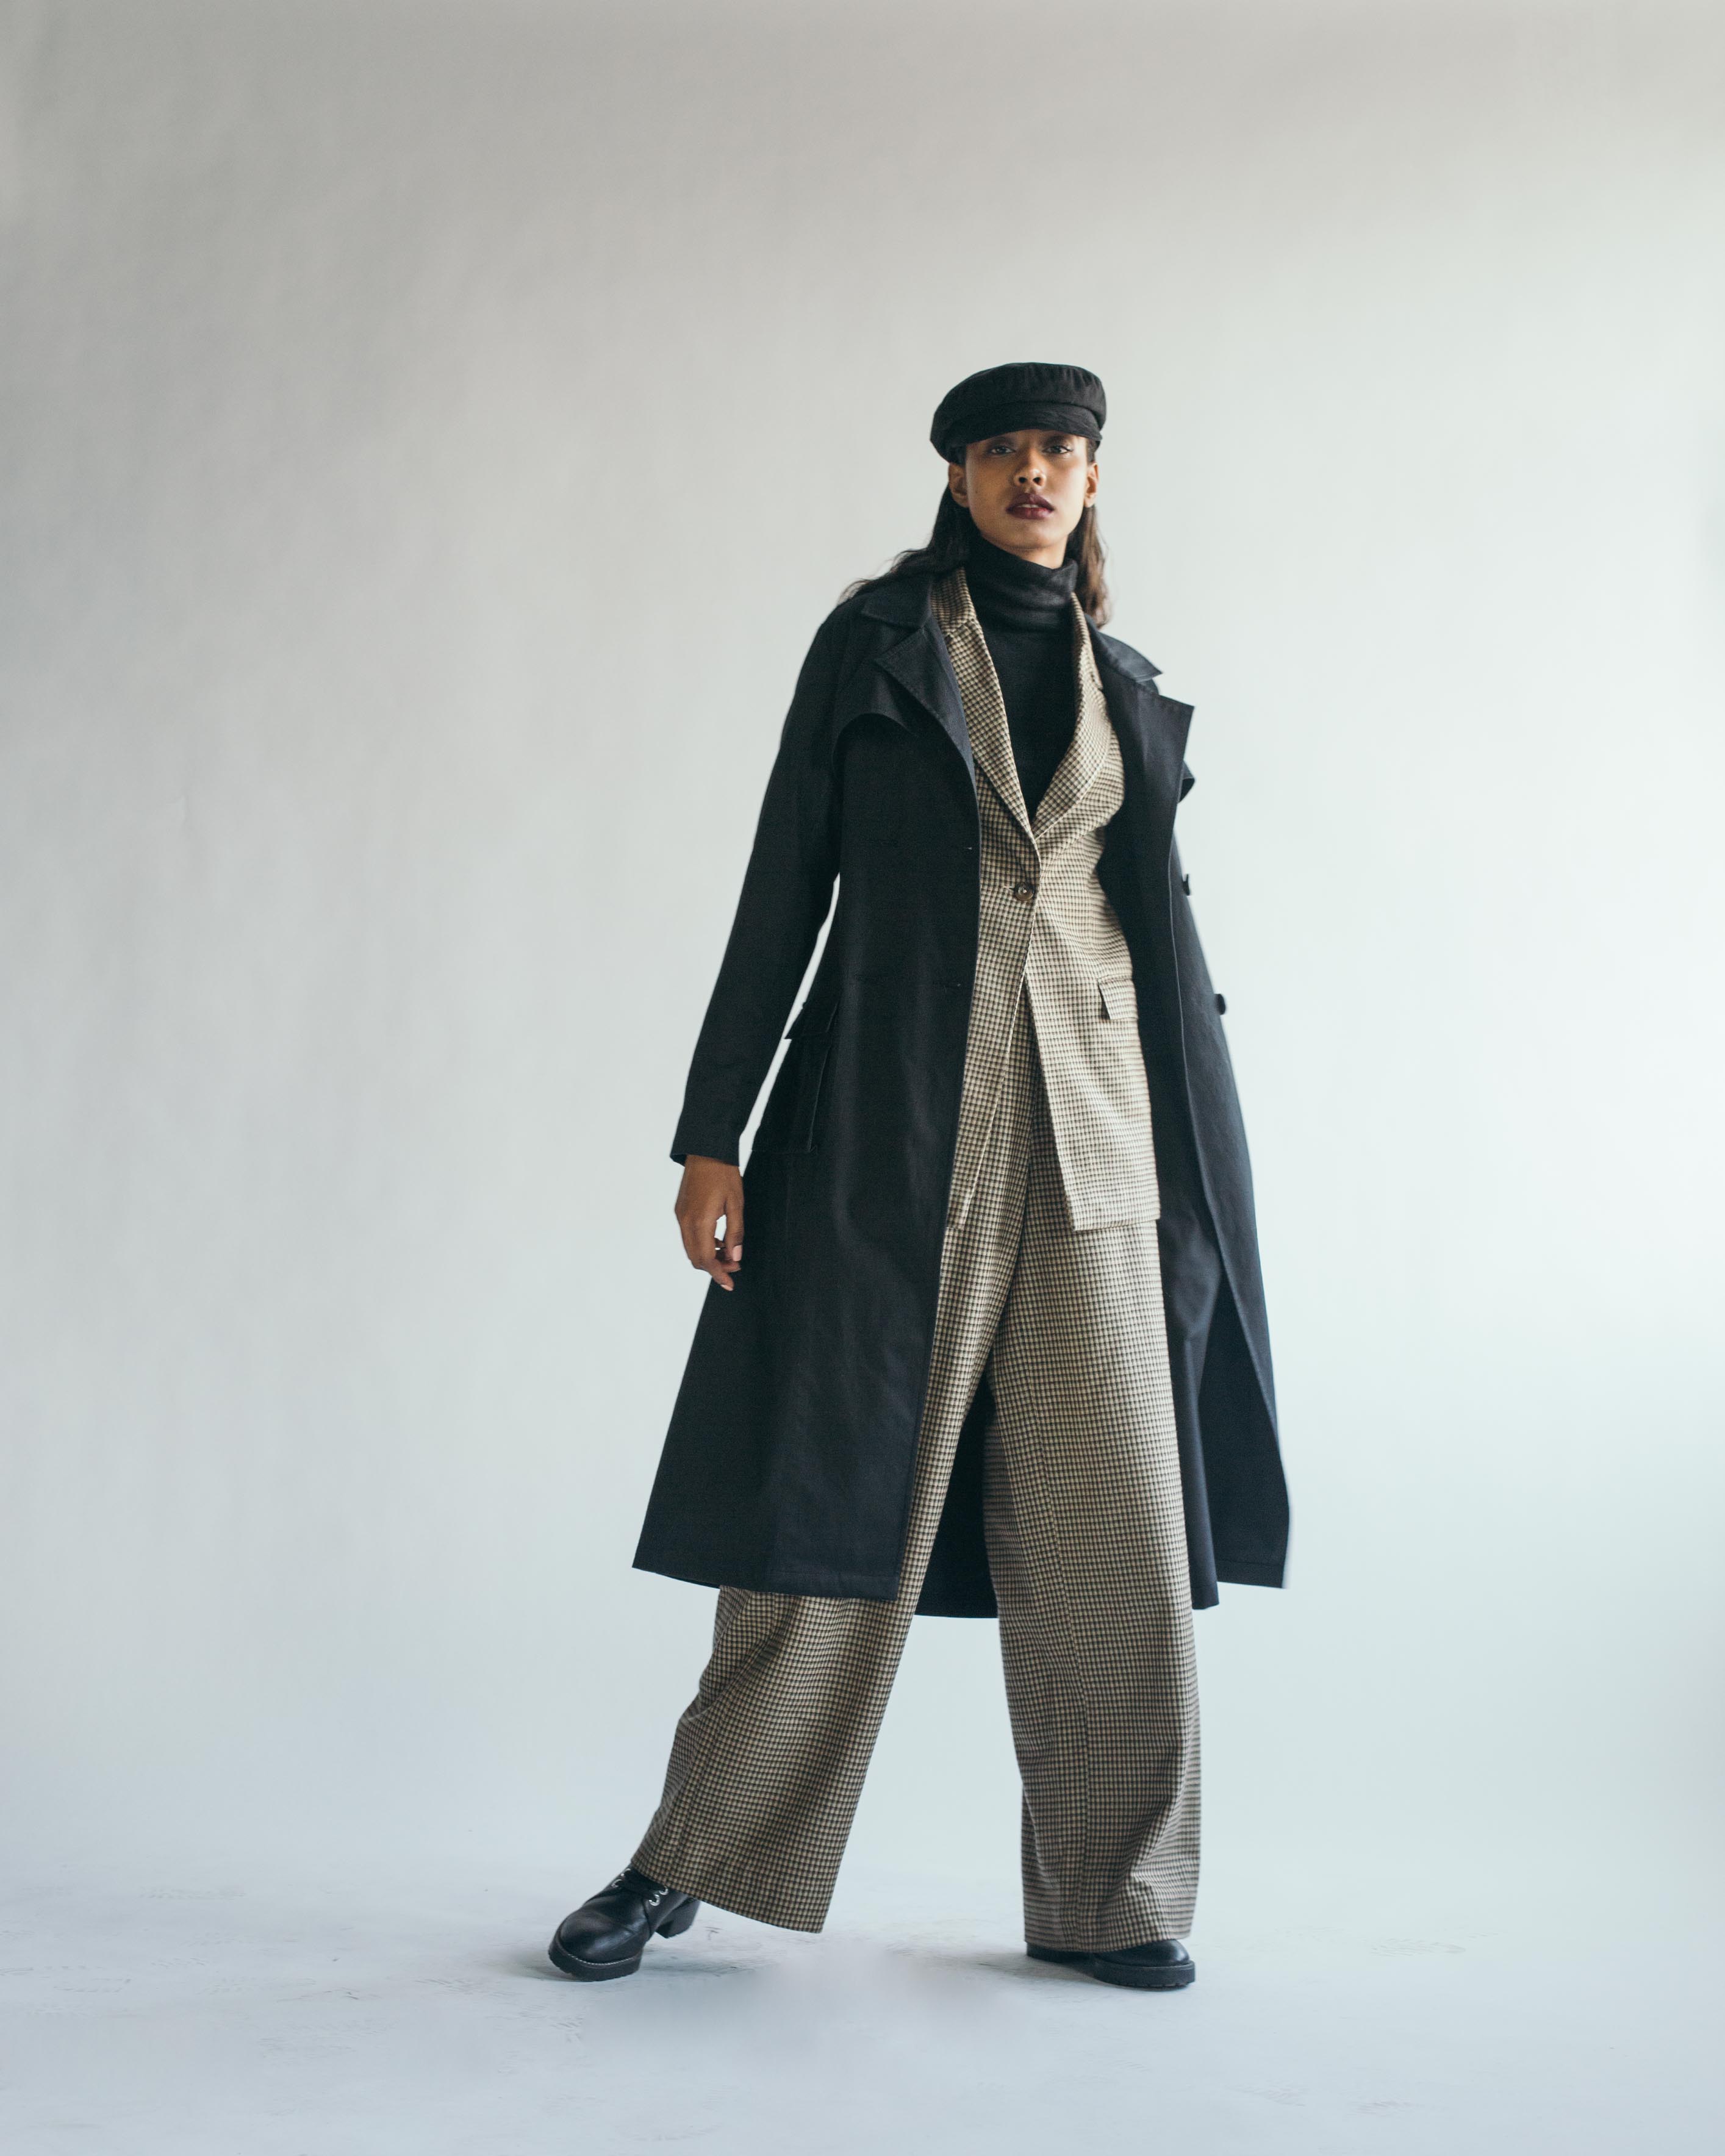 The Charcoal Trench